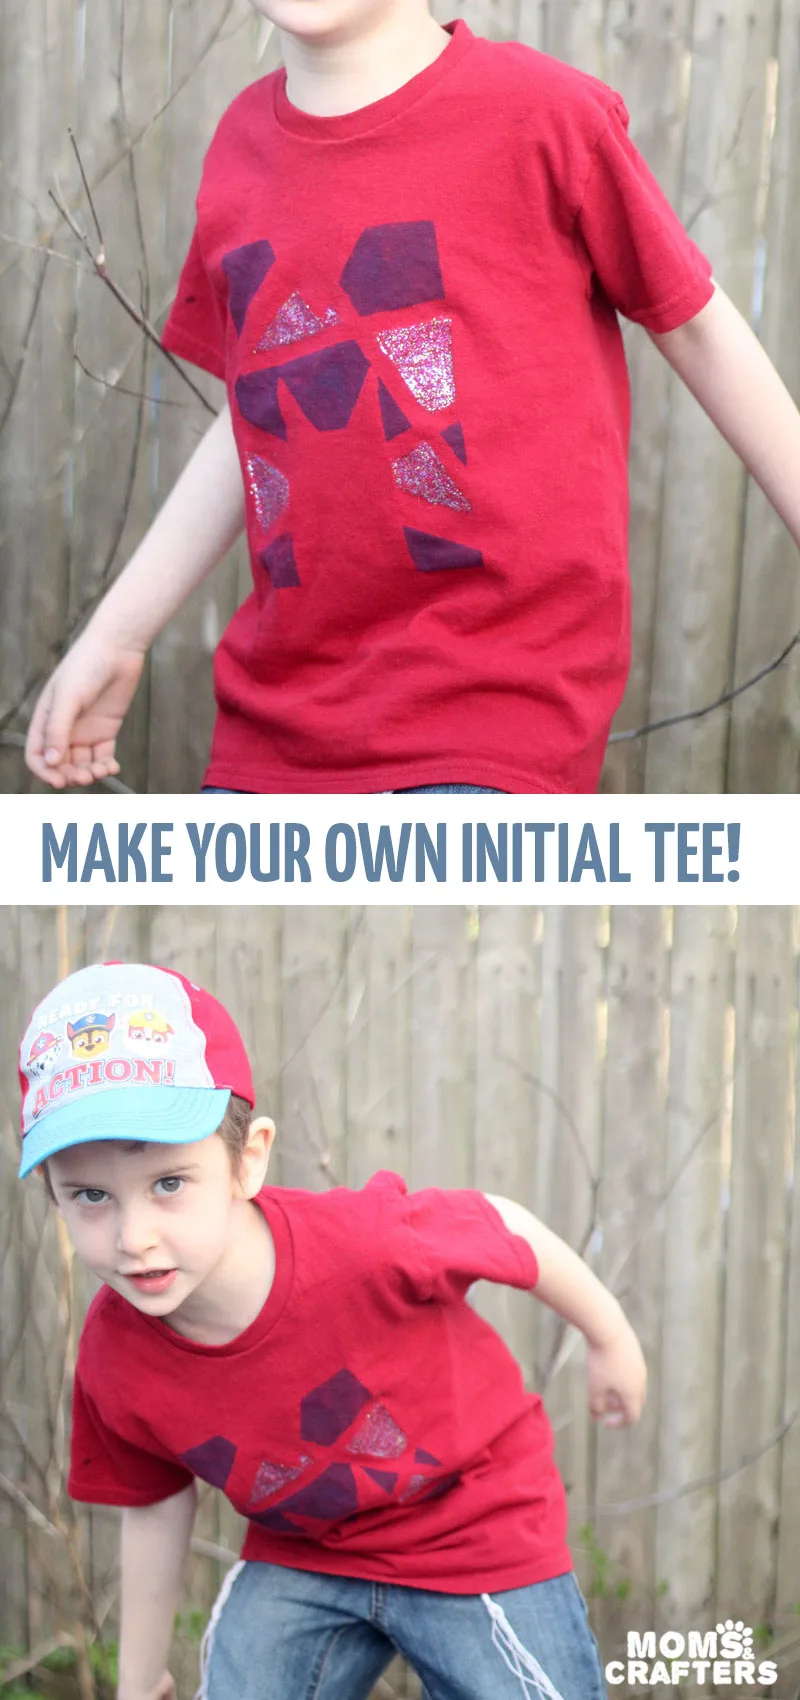 Make your own DIY monogram shirt for kids teens or tweens! This cool painted fabric initial tshirt craft makes a cool summer camp craft too! #crafts #momsandcrafters #diyshirt